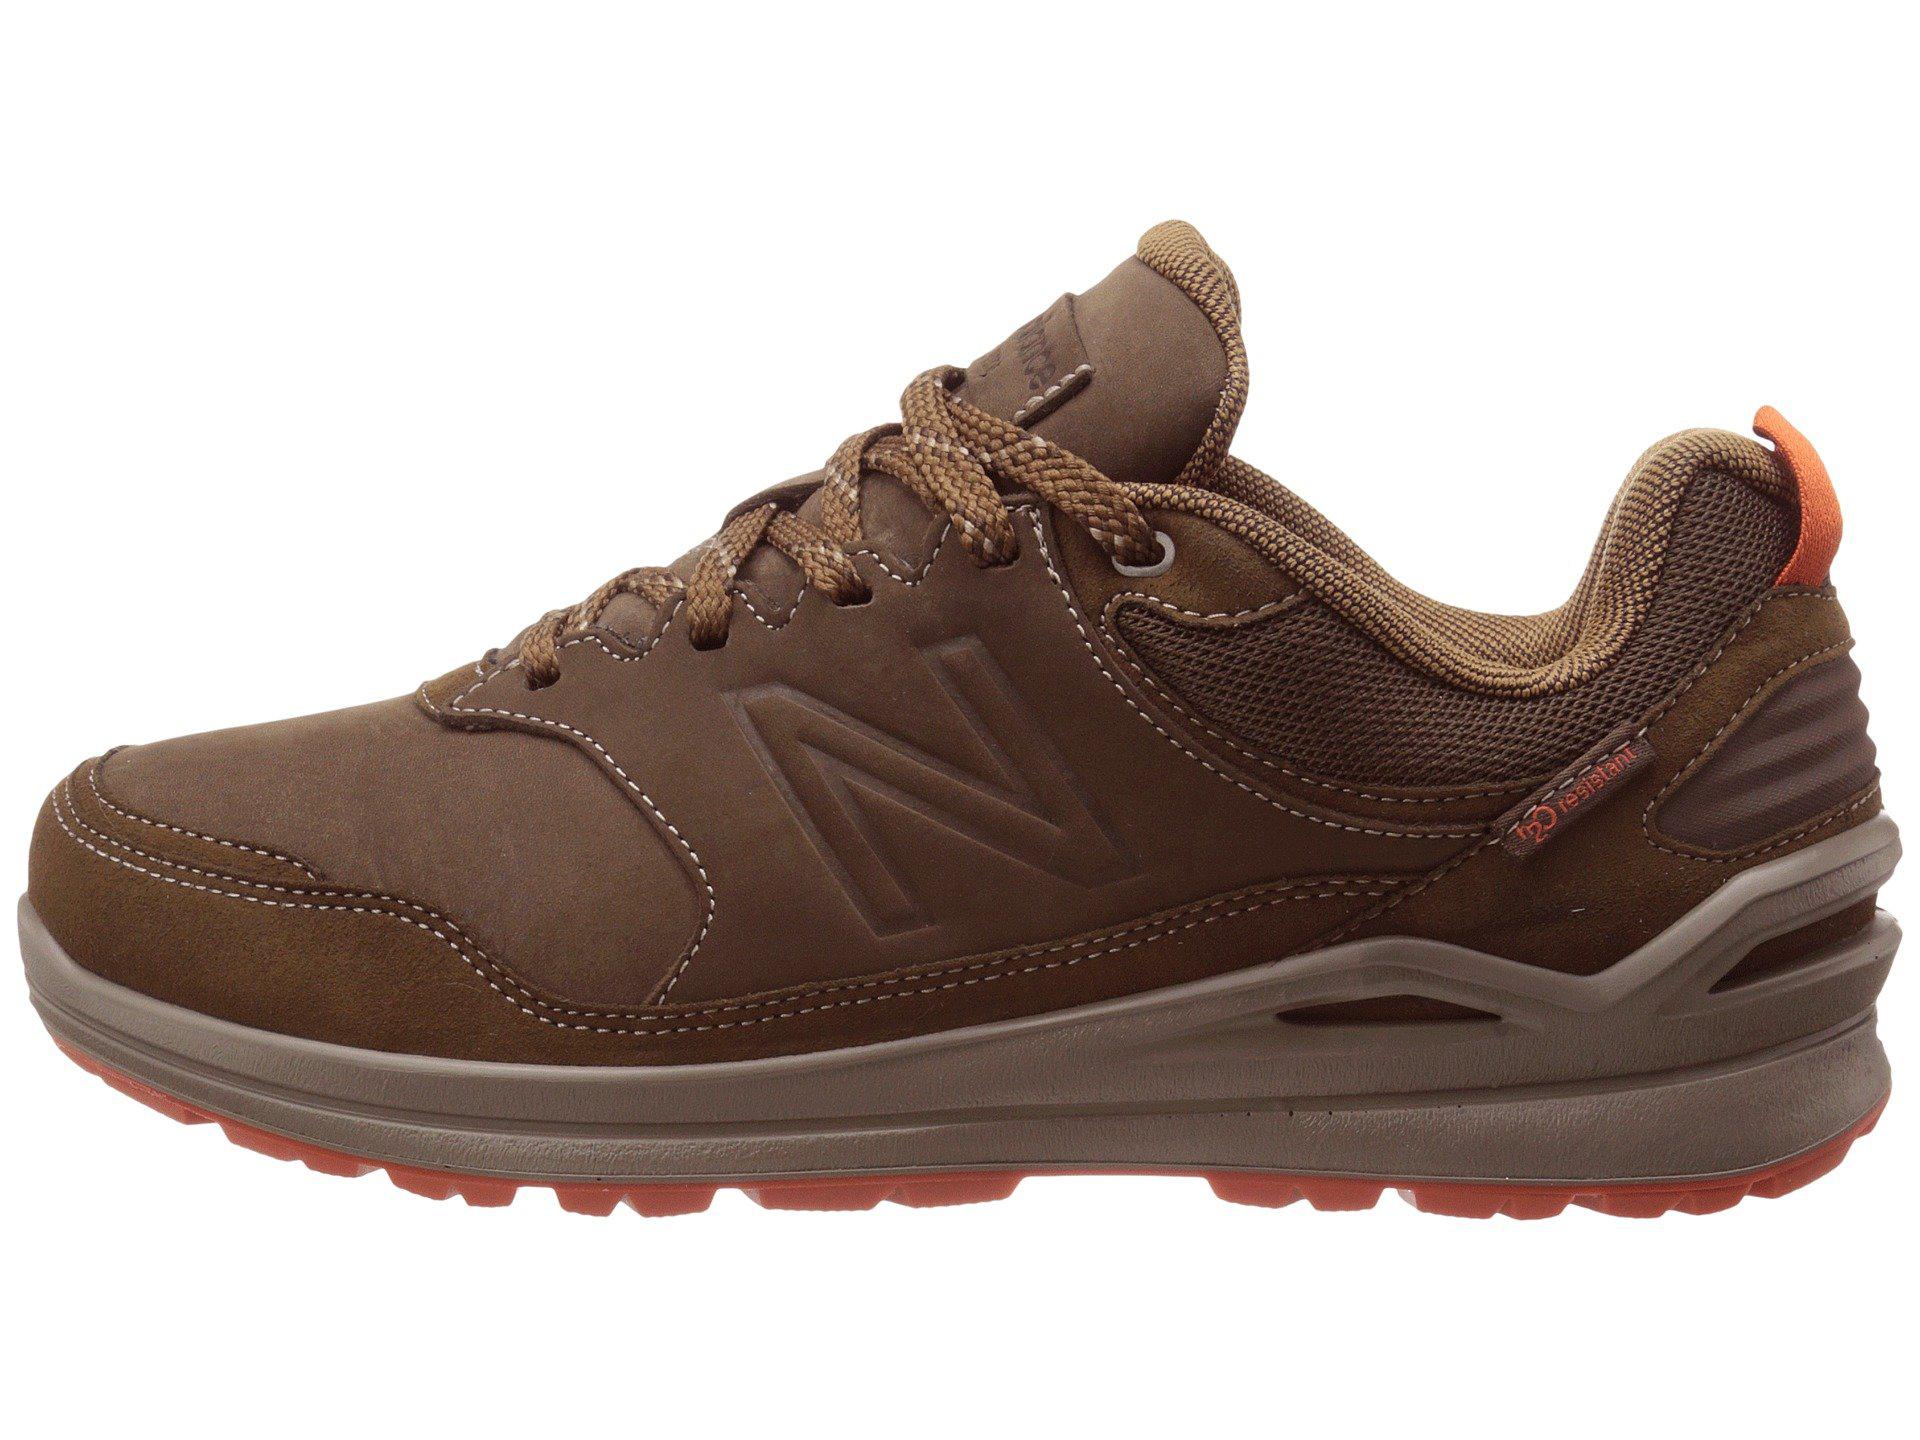 New Balance Leather Mw3000 Trail Walking Shoe in Brown for Men - Lyst